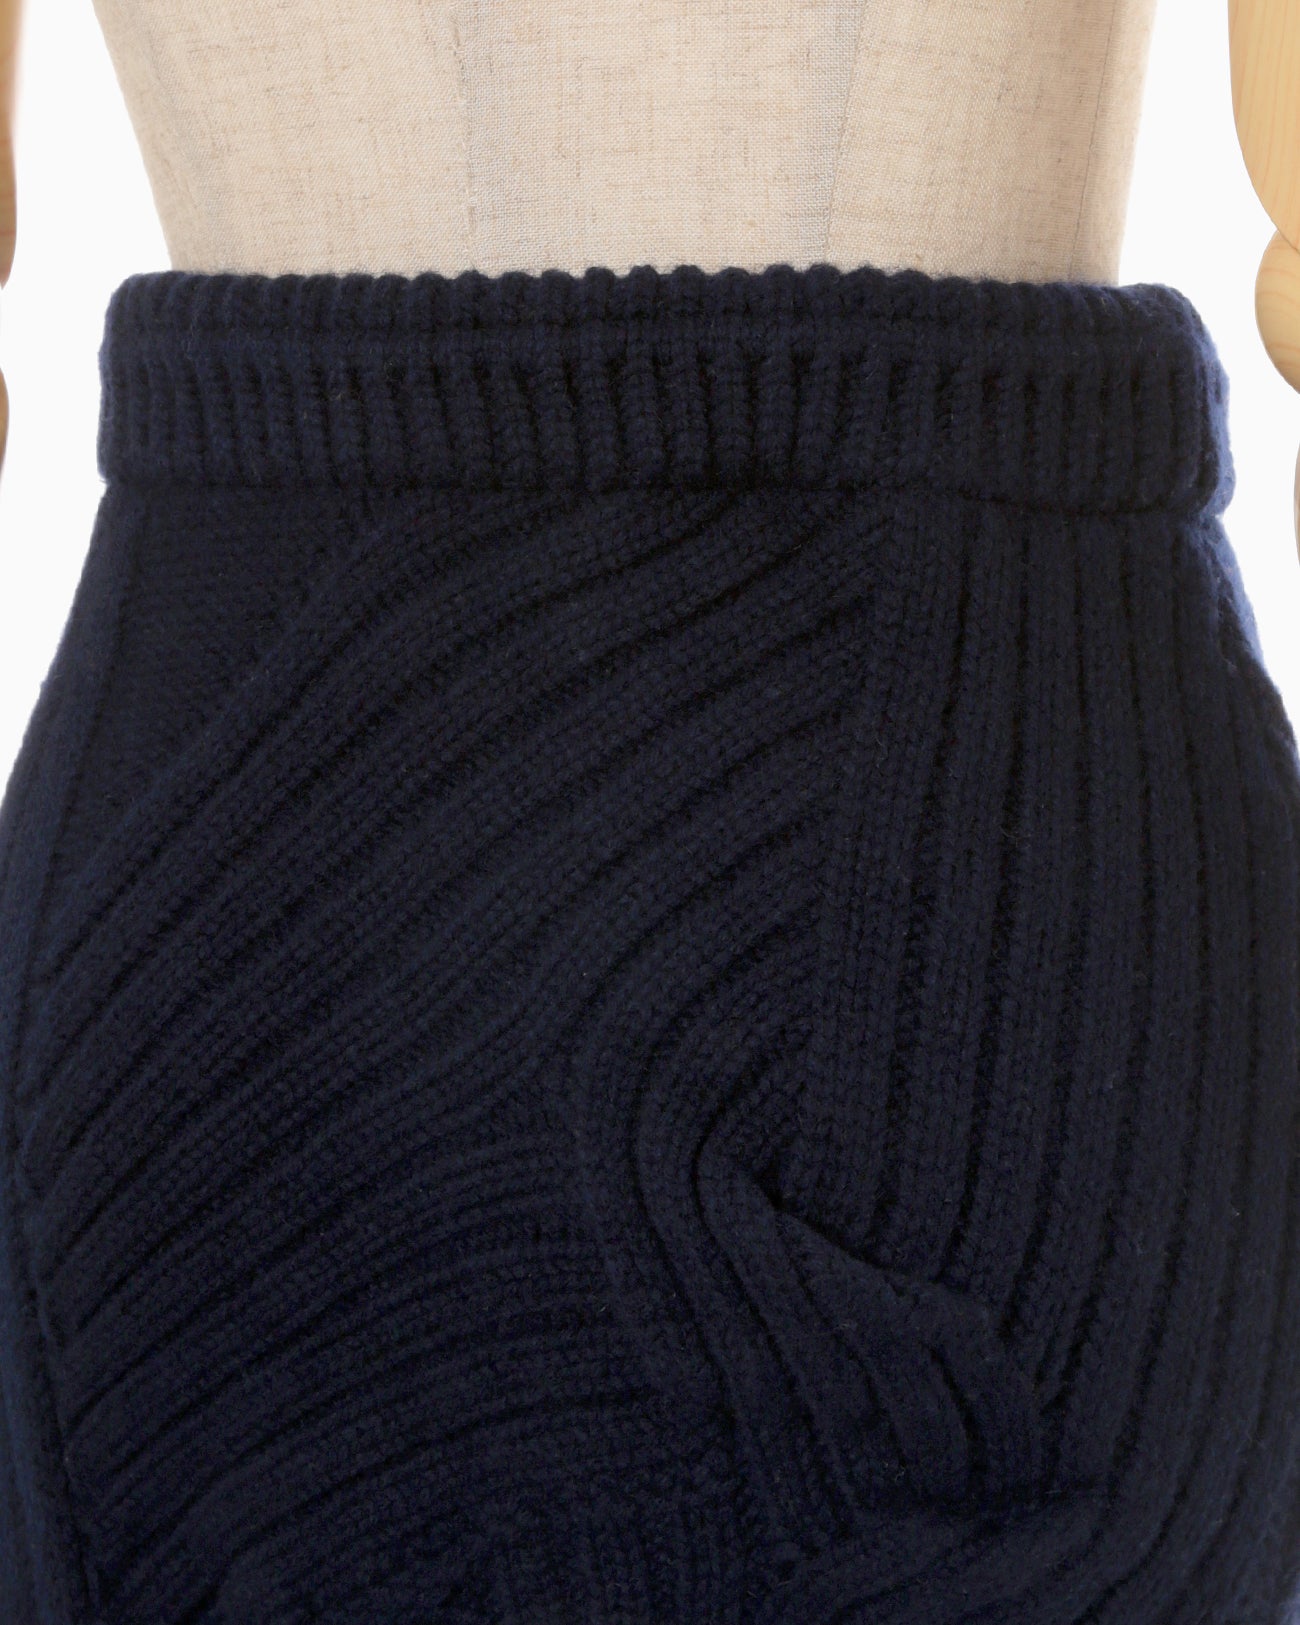 Basket Motif Cable Stitch Knitted Skirt - navy